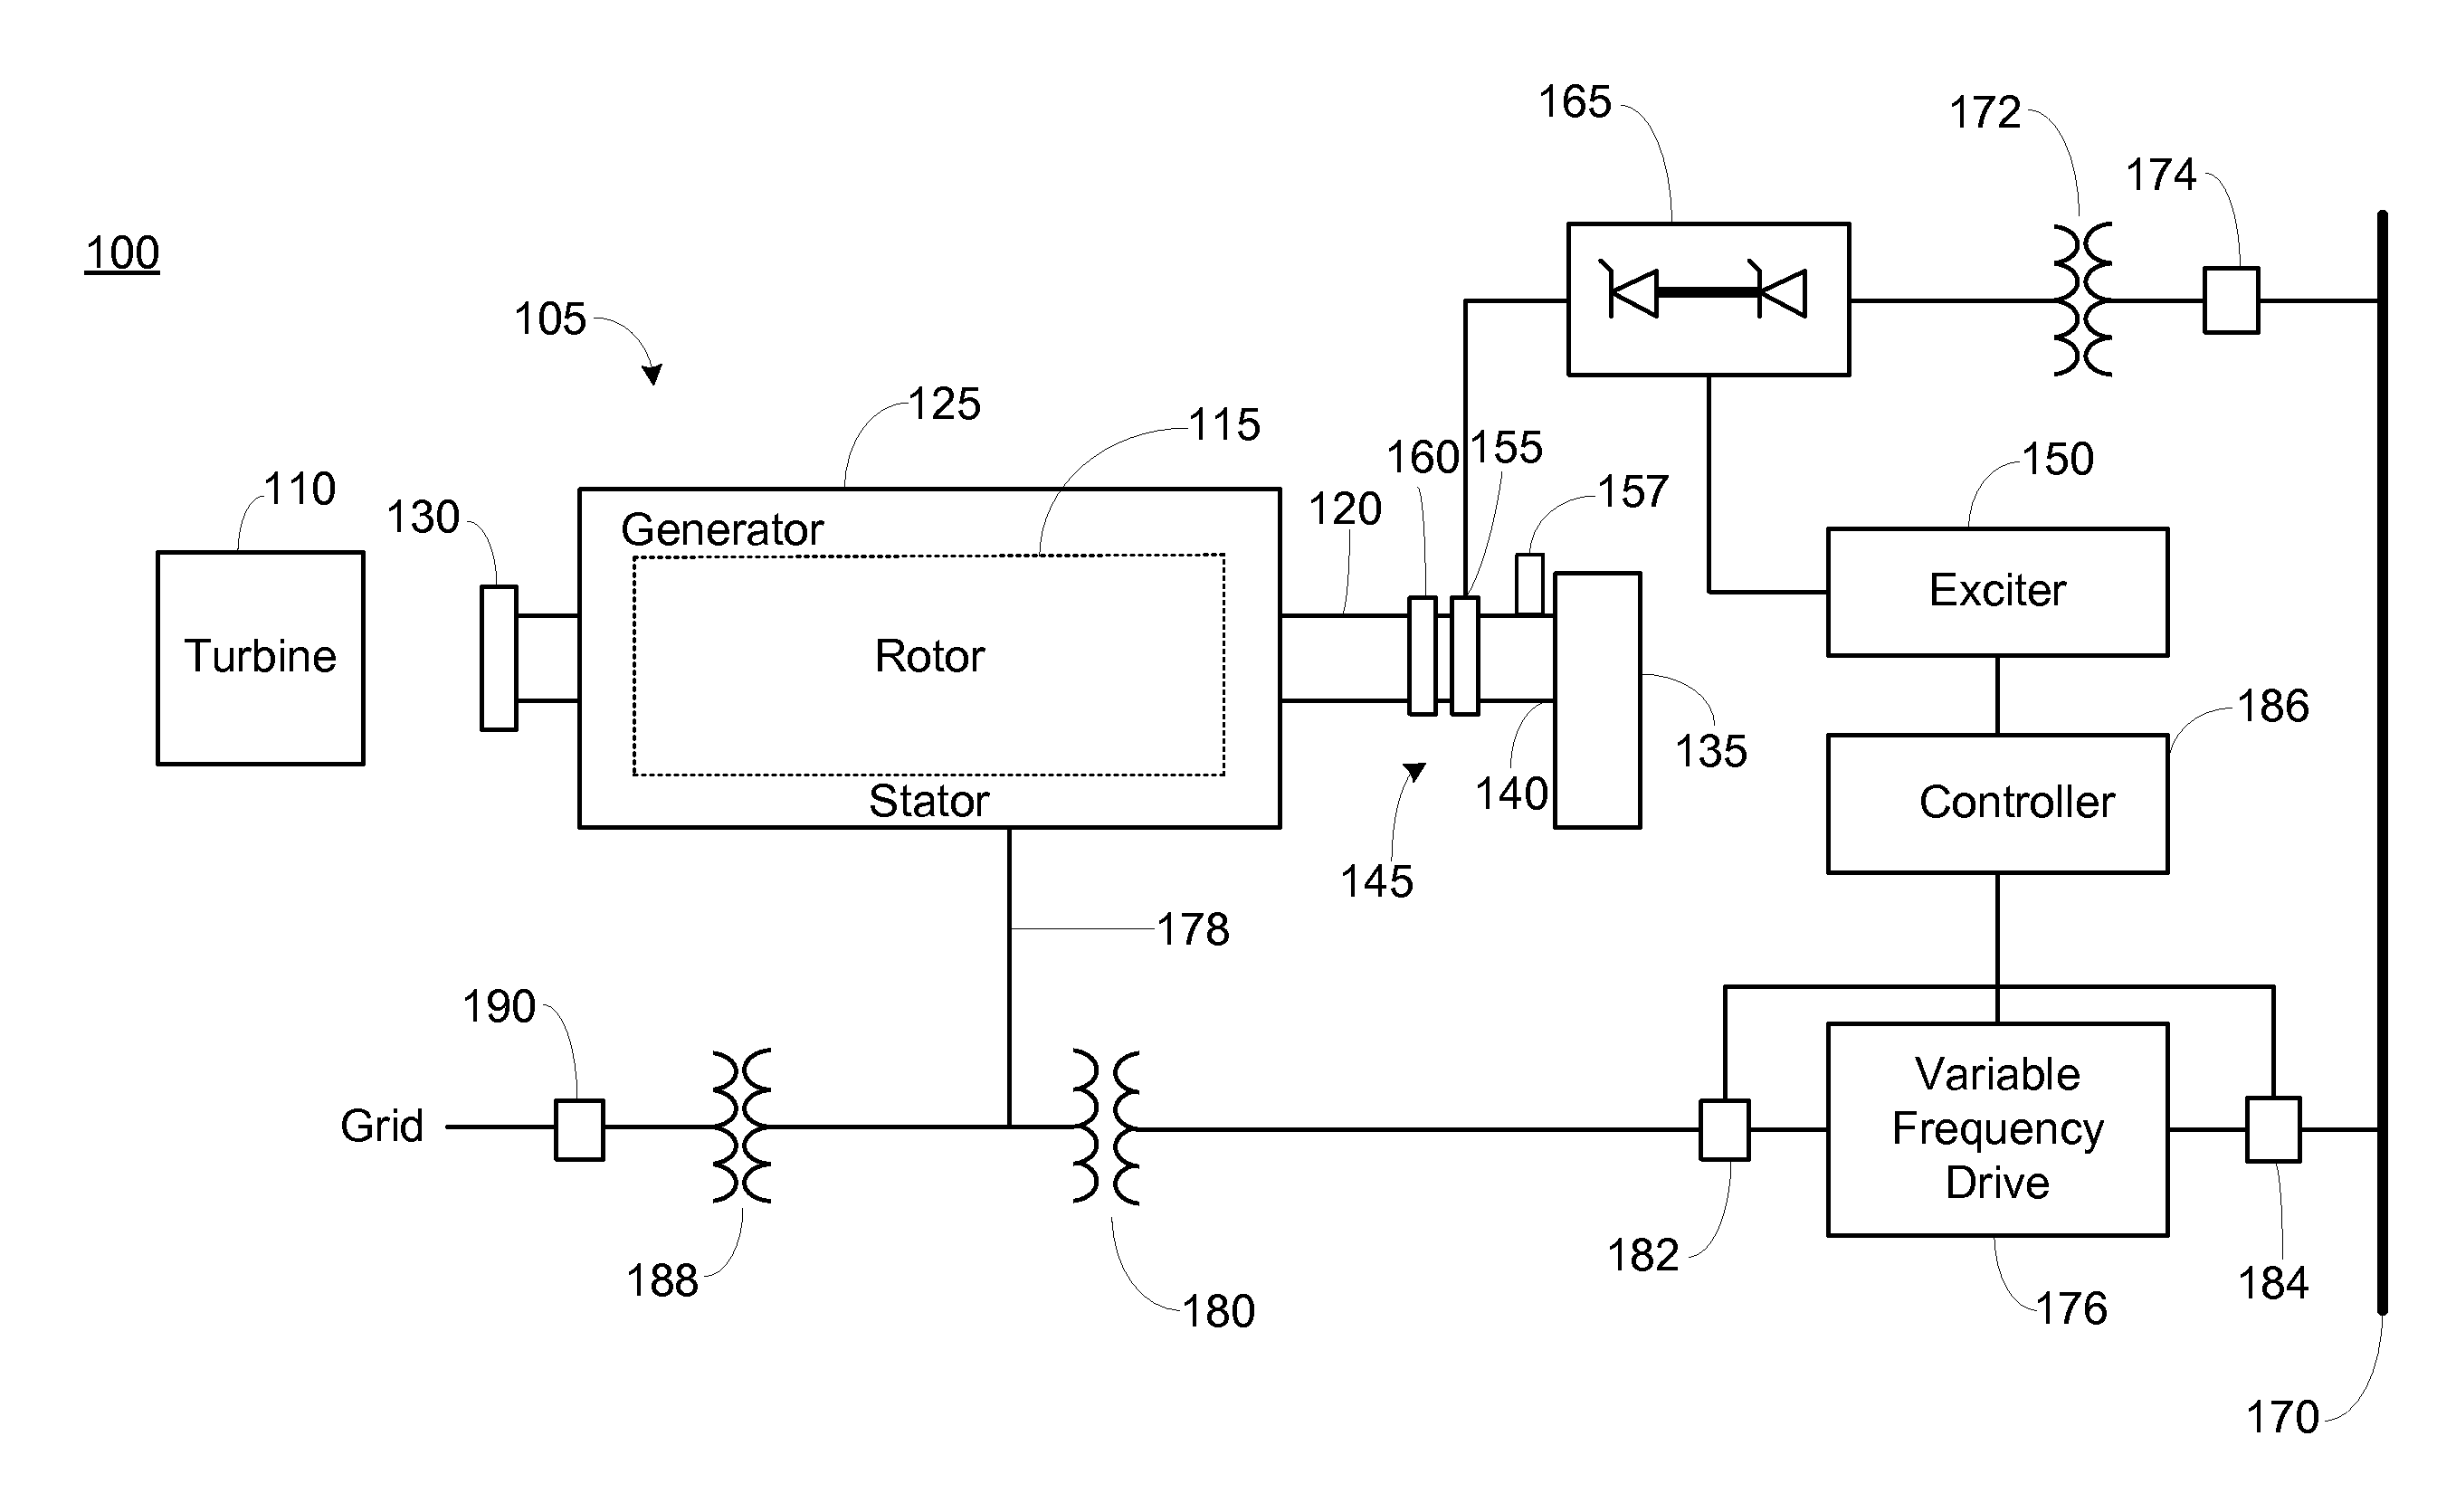 Conversion of synchronous generator to synchronous condenser